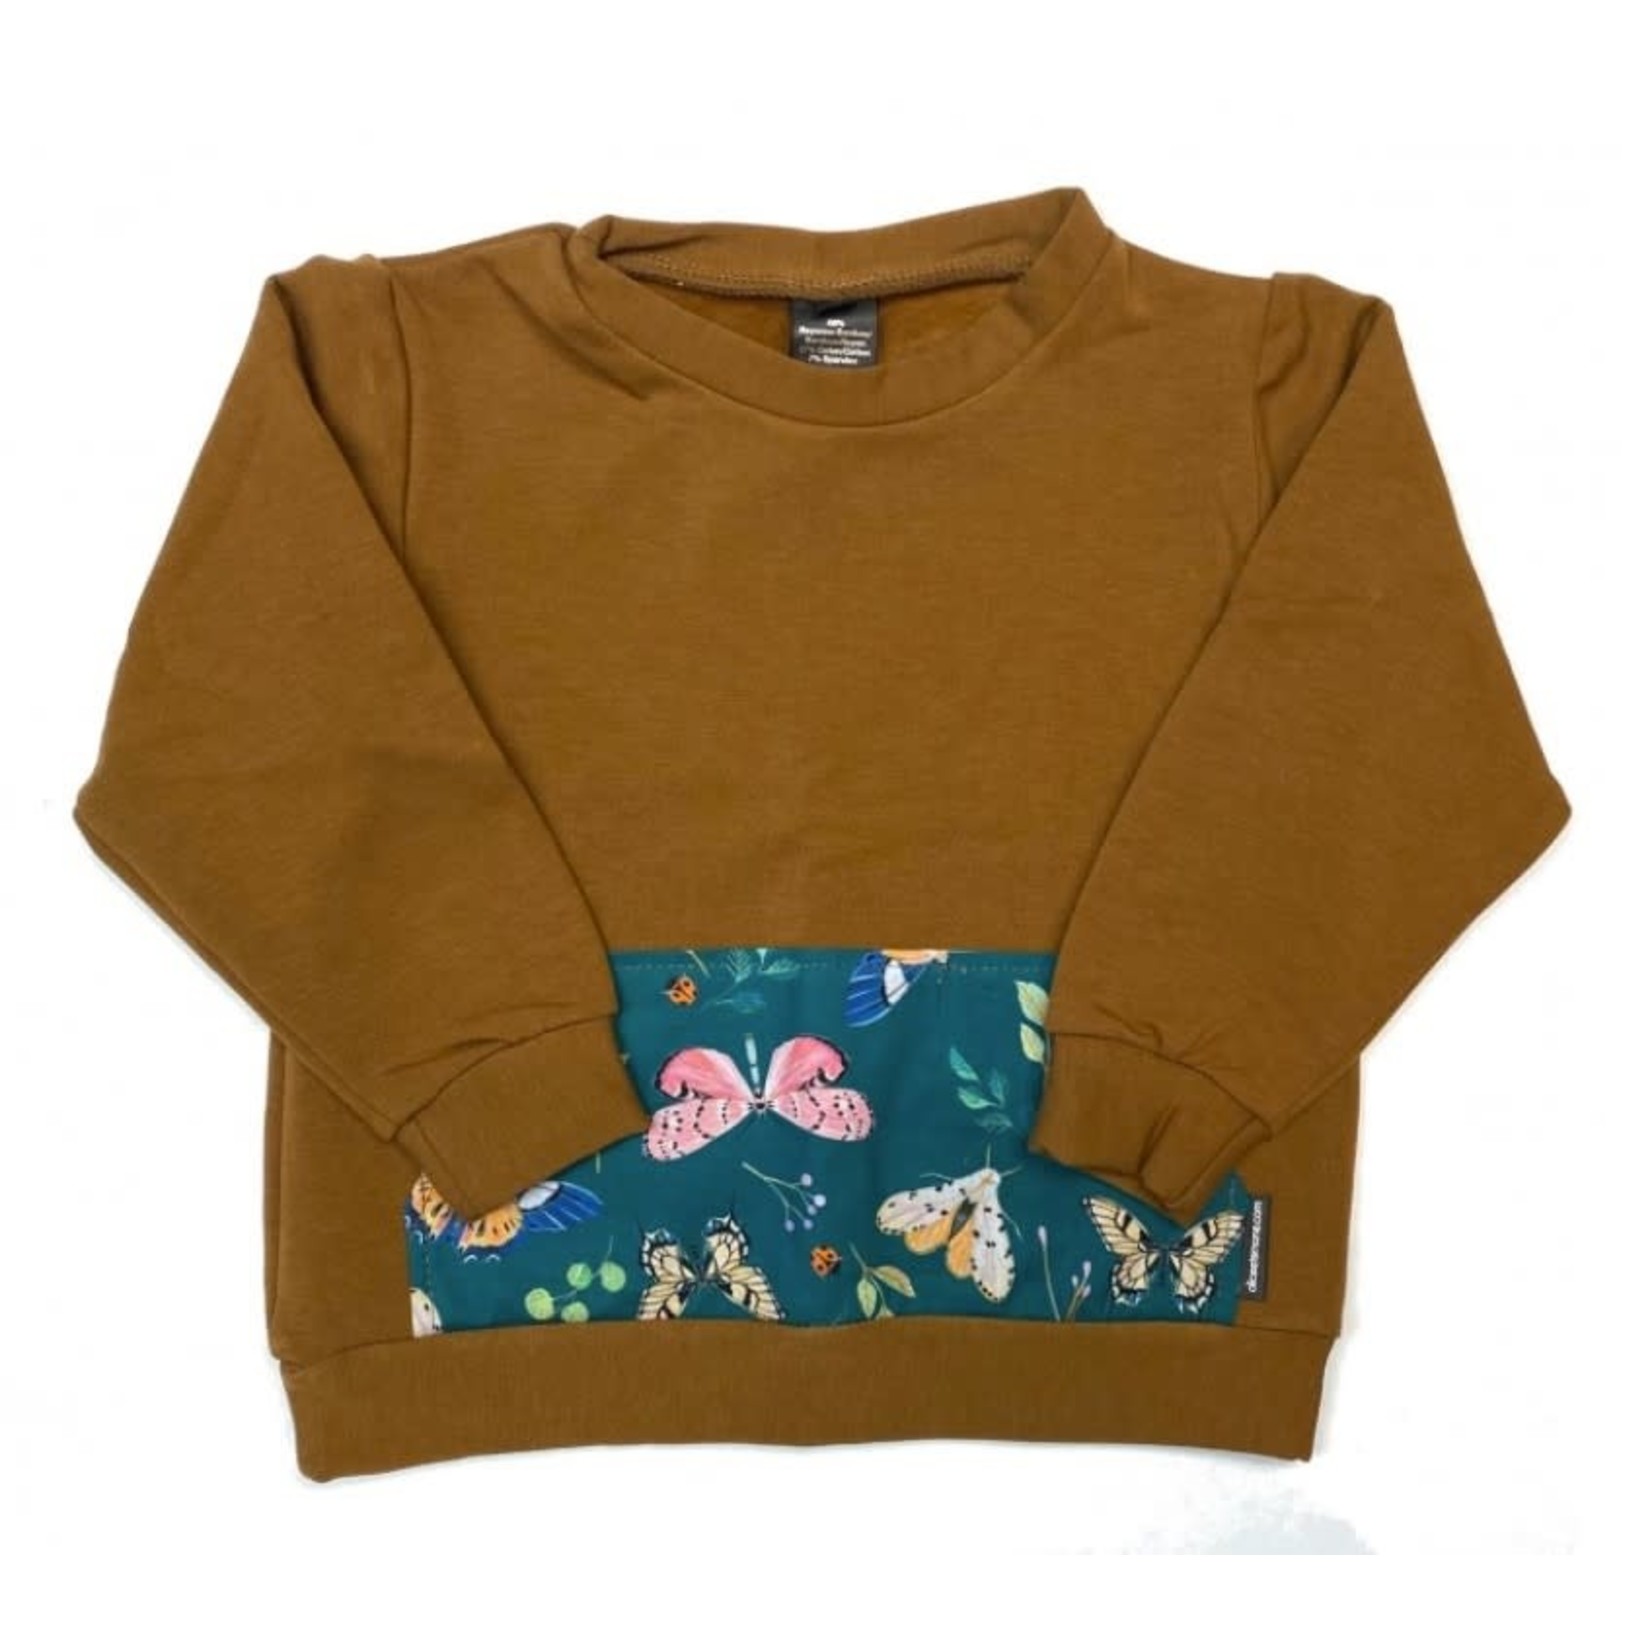 Alice et Simone ALICE ET SIMONE - Bambou cinnamon crew neck sweater with kangaroo butterfly pocket at front